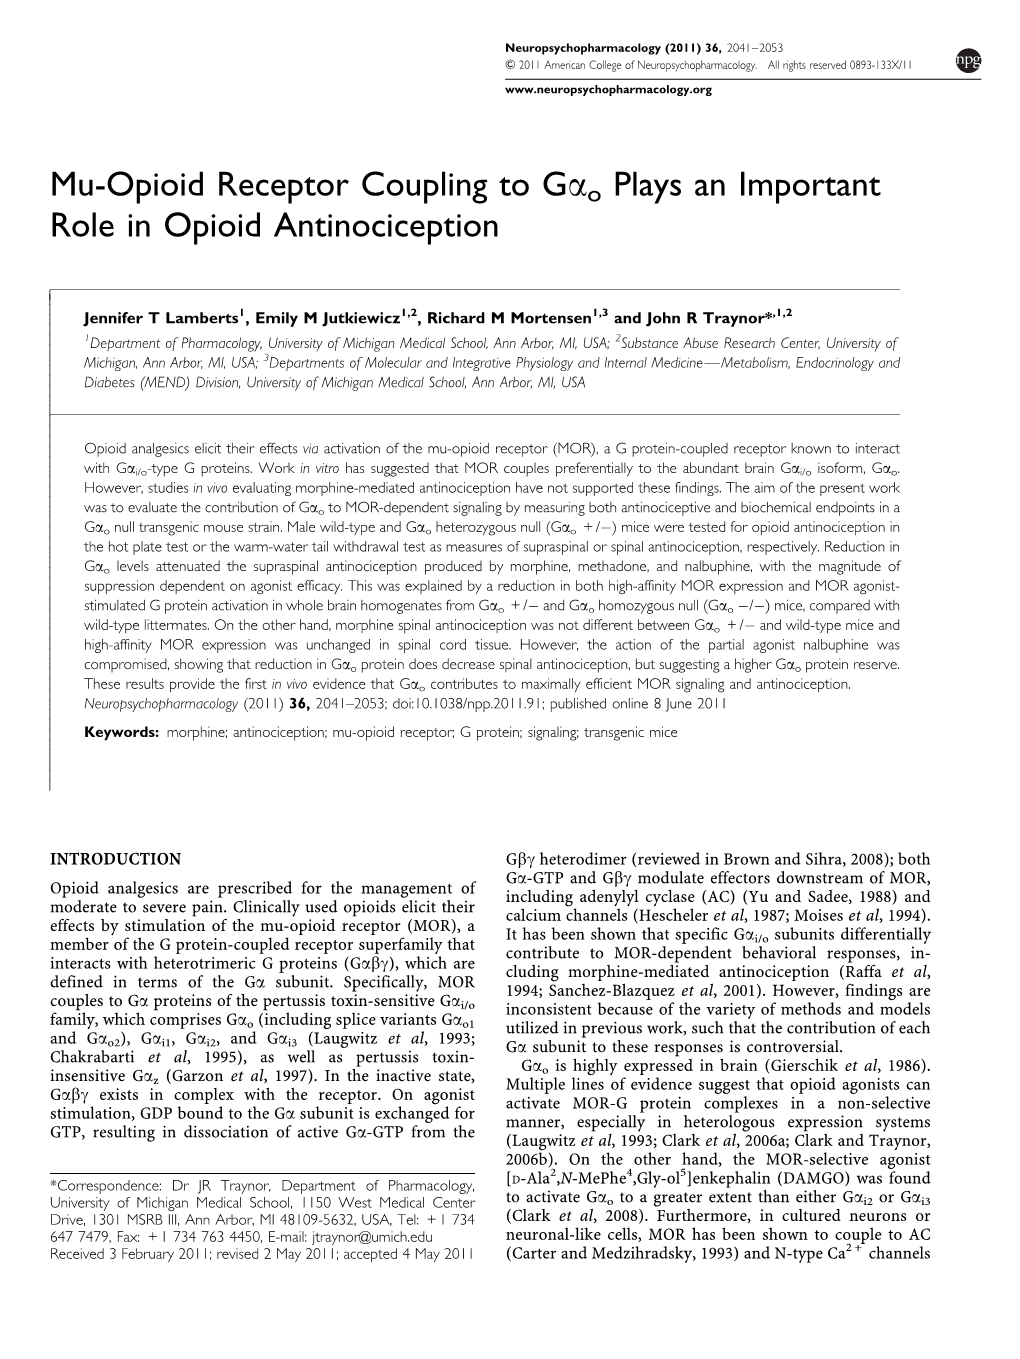 Mu-Opioid Receptor Coupling to Gαo Plays an Important Role in Opioid